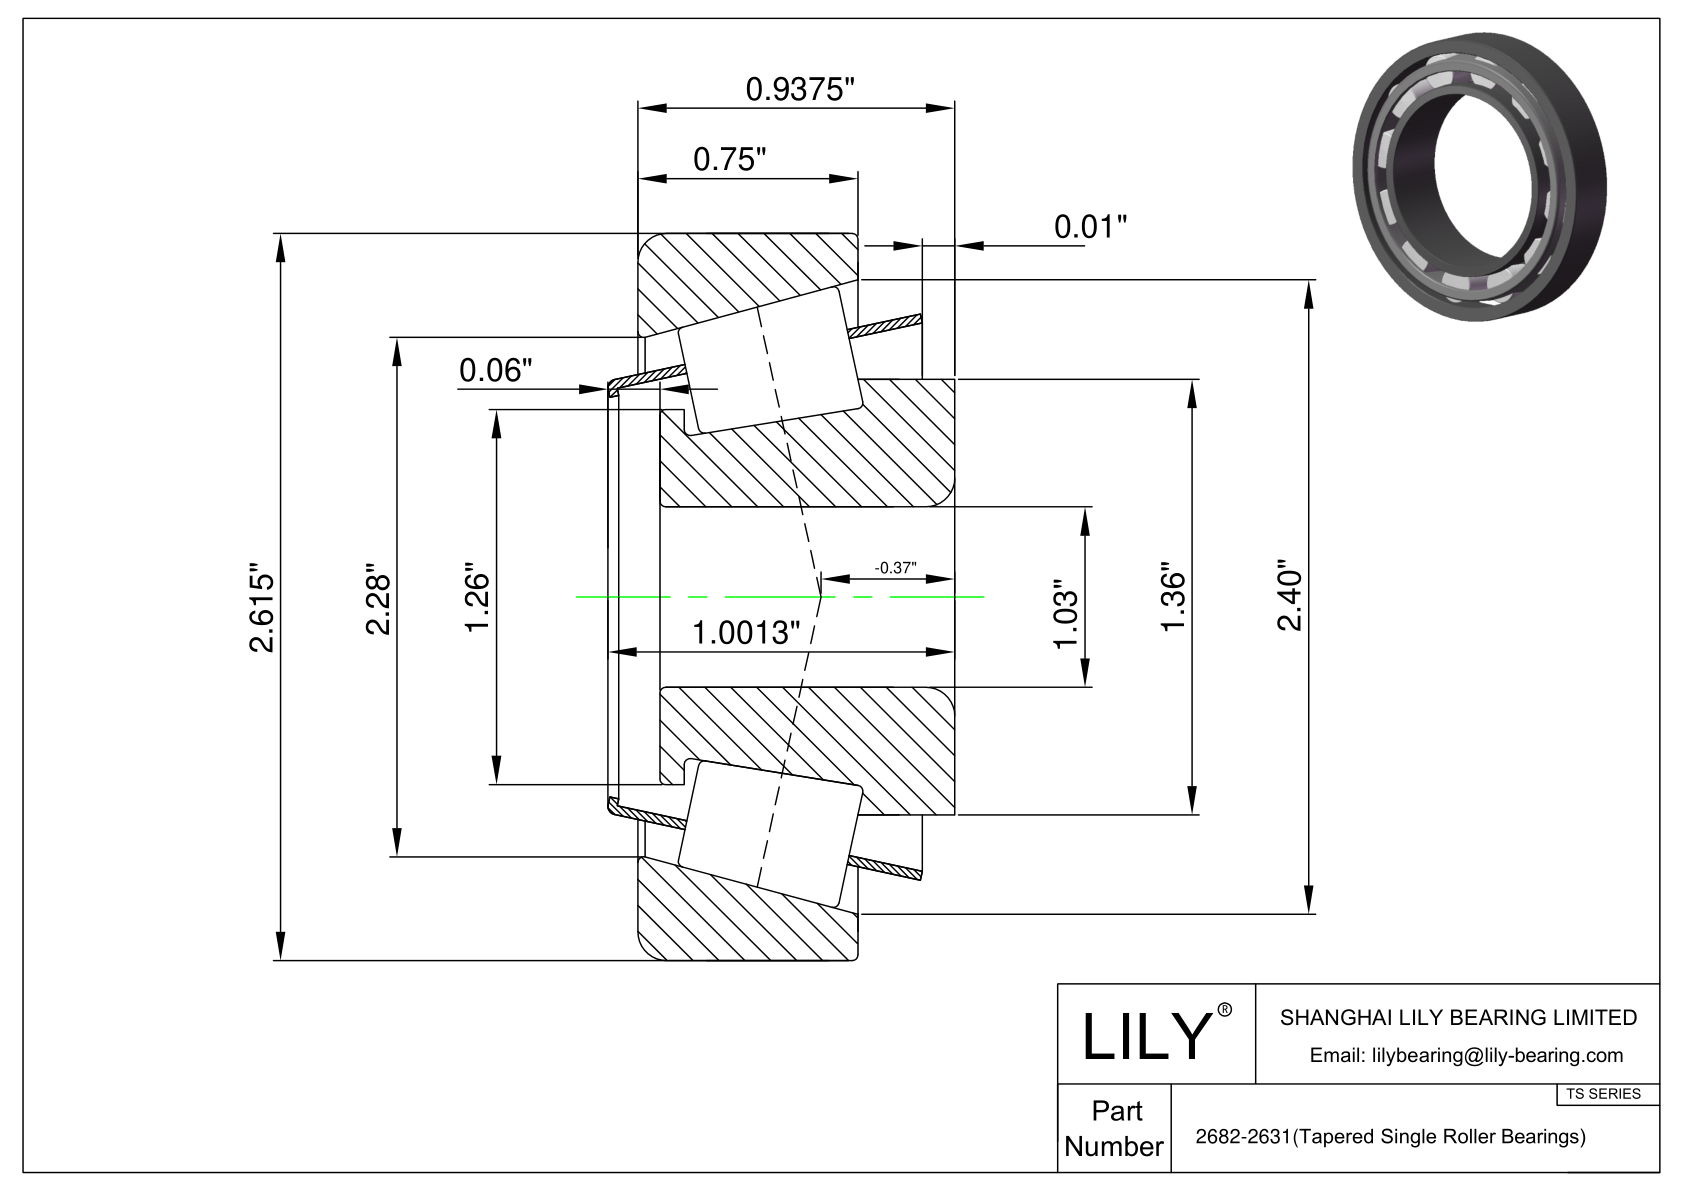 2682-2631 TS (Tapered Single Roller Bearings) (Imperial) cad drawing